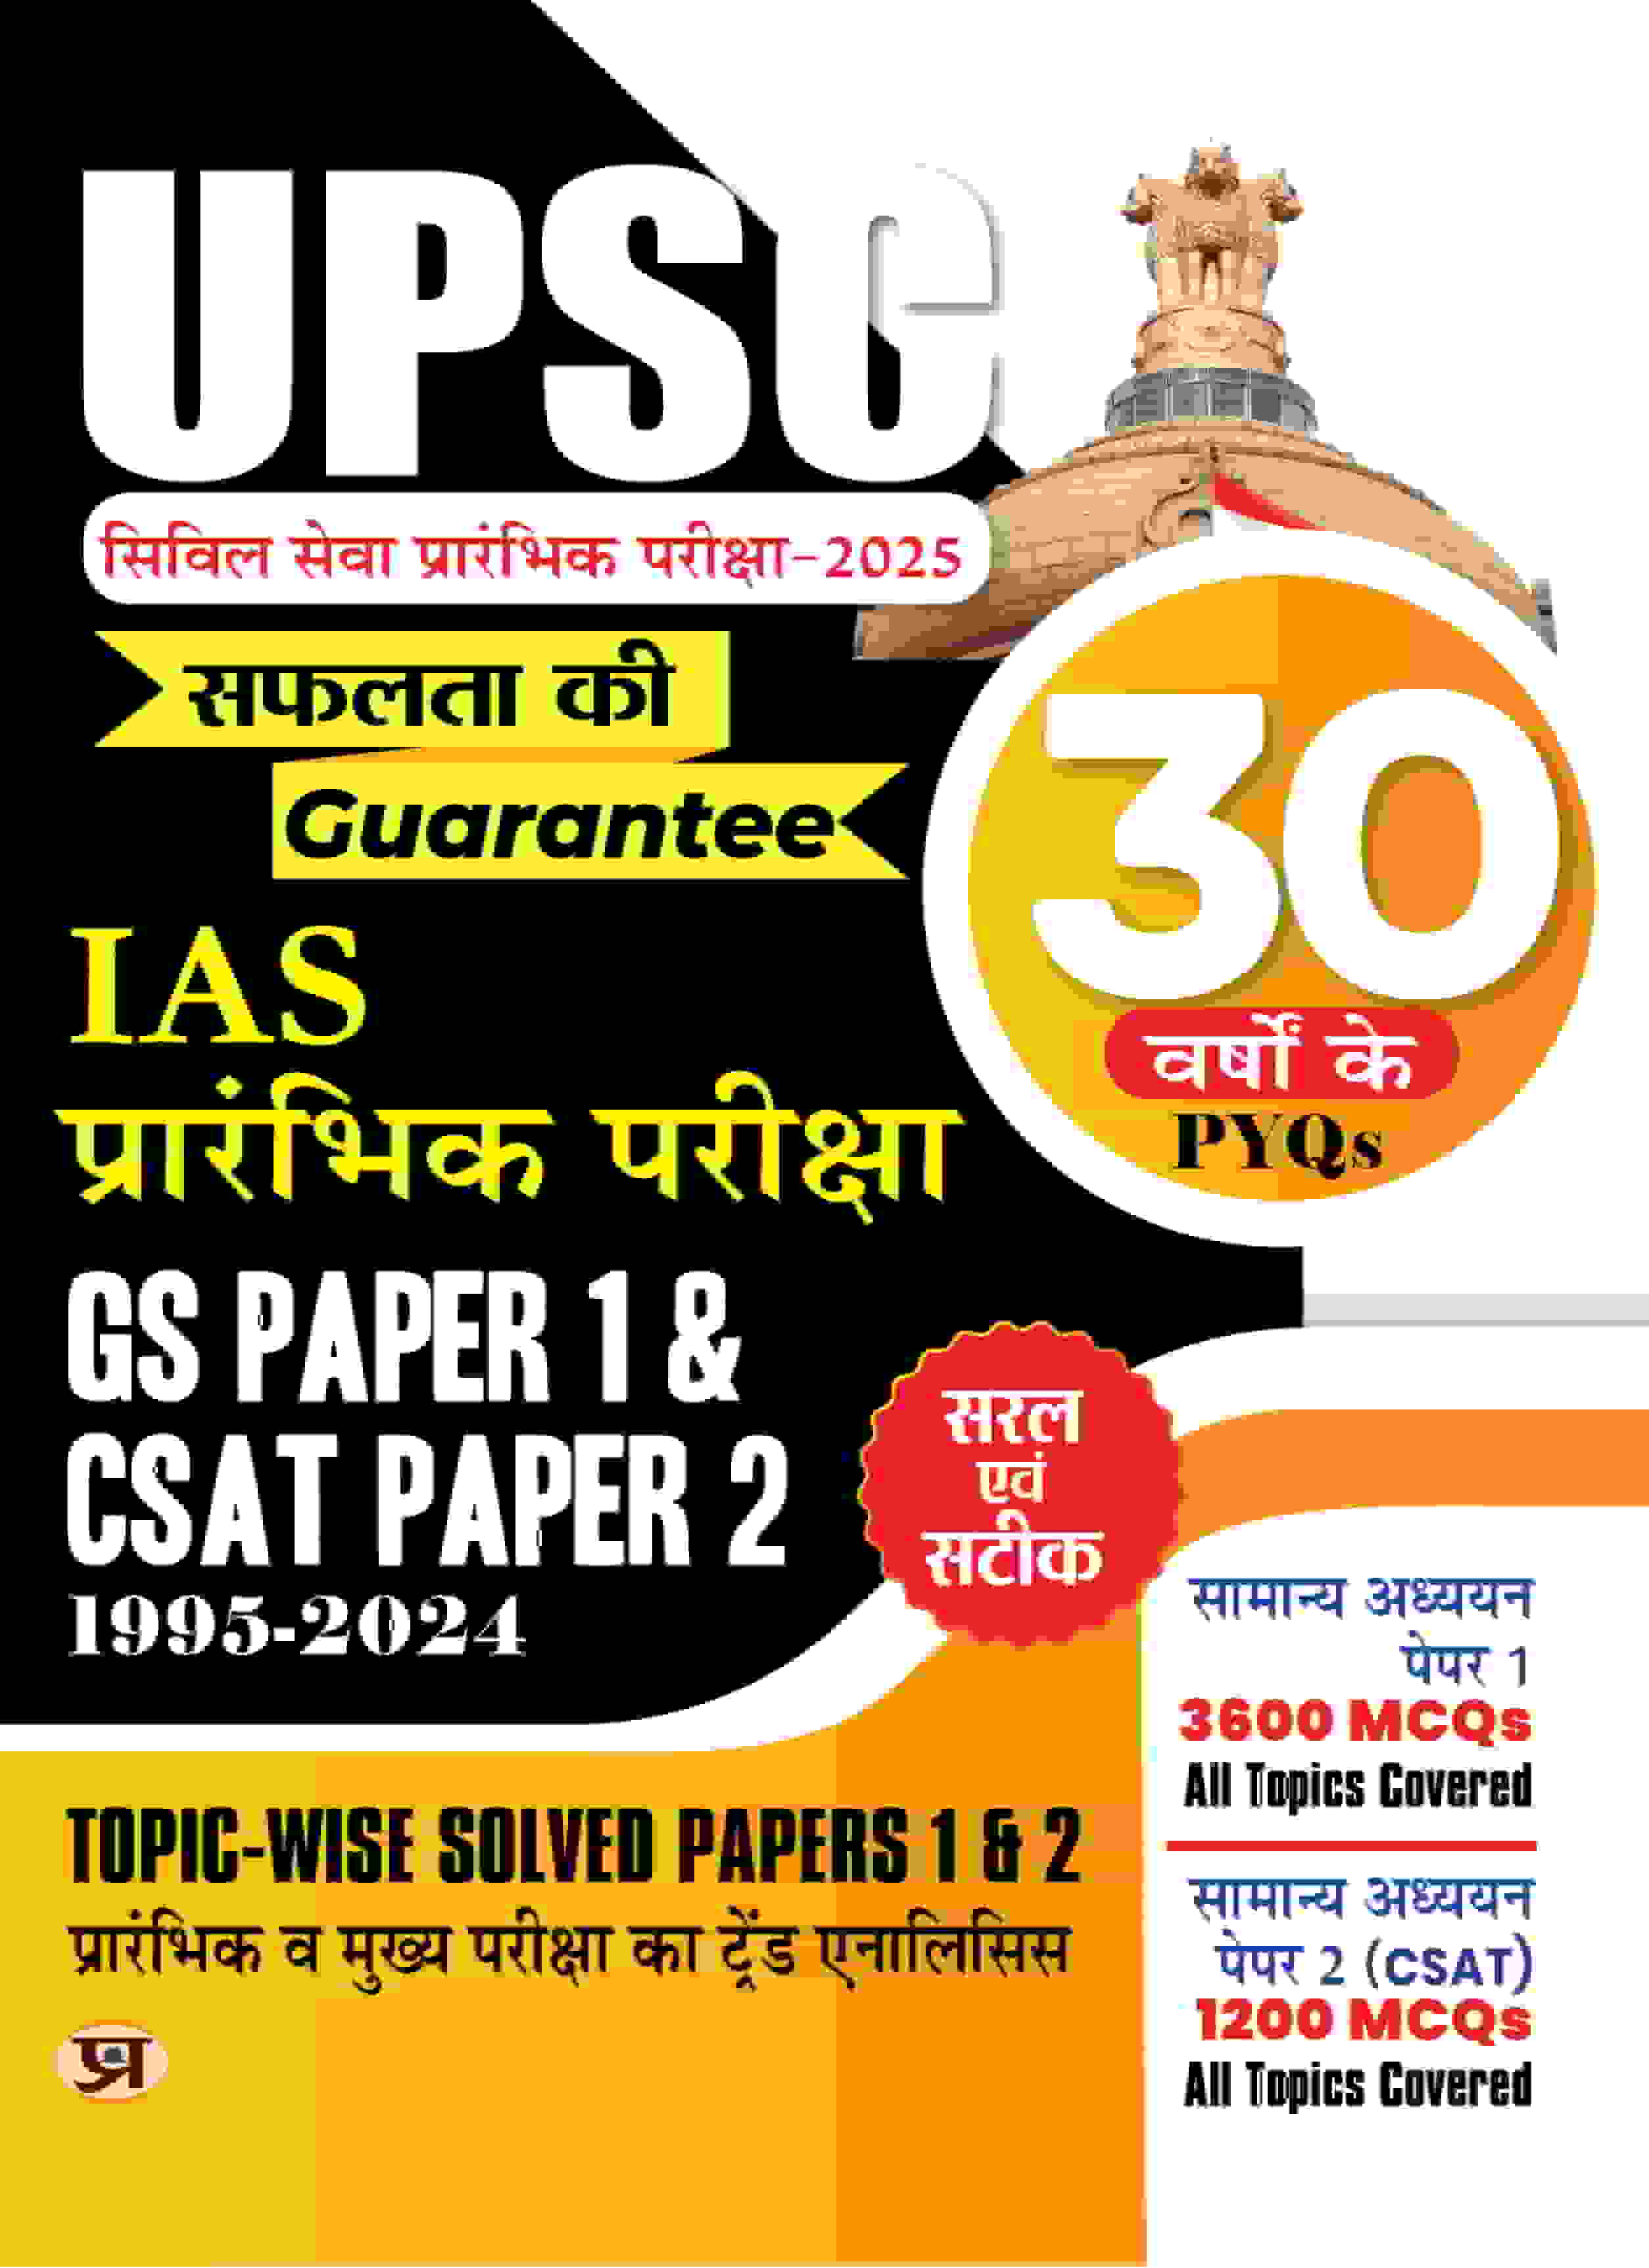 30 Years UPSC Prelims Civil Services Exam 2025 | IAS Prelims Topic-wise Solved Papers 1 & 2 (1995-2024) | General Studies & Aptitude (CSAT) MCQs | PYQs Previous Year Questions Bank Guide Book in Hindi